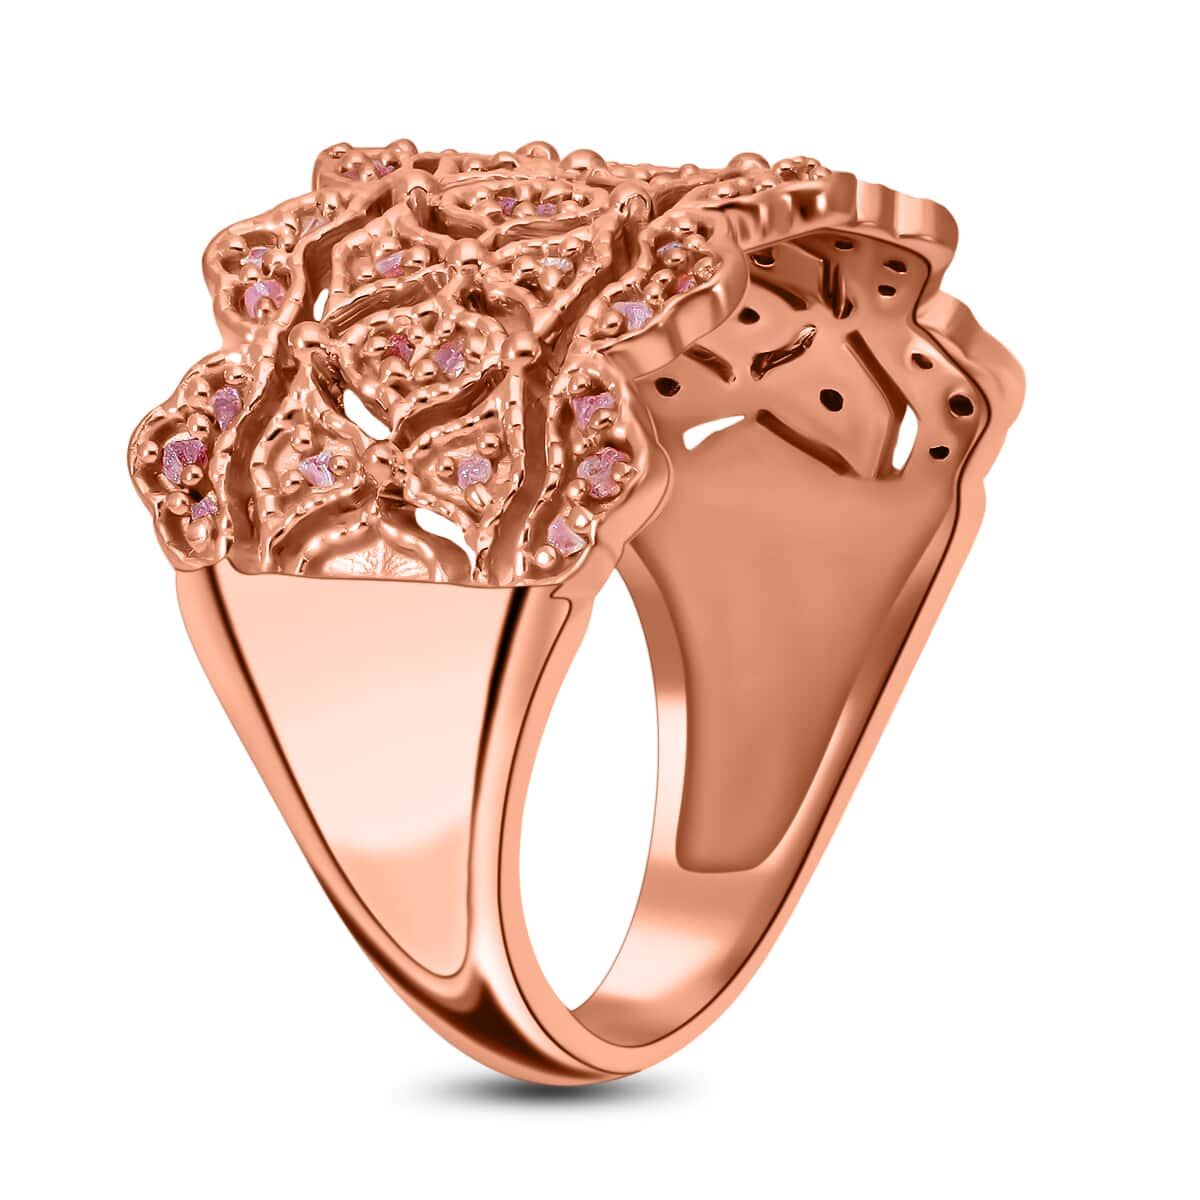 Uncut Natural Pink Diamond Ring, Pink Diamond Cocktail Ring, Vermeil Rose Gold Over Sterling Silver Ring, Engagement Ring For Her  0.25 ctw image number 3